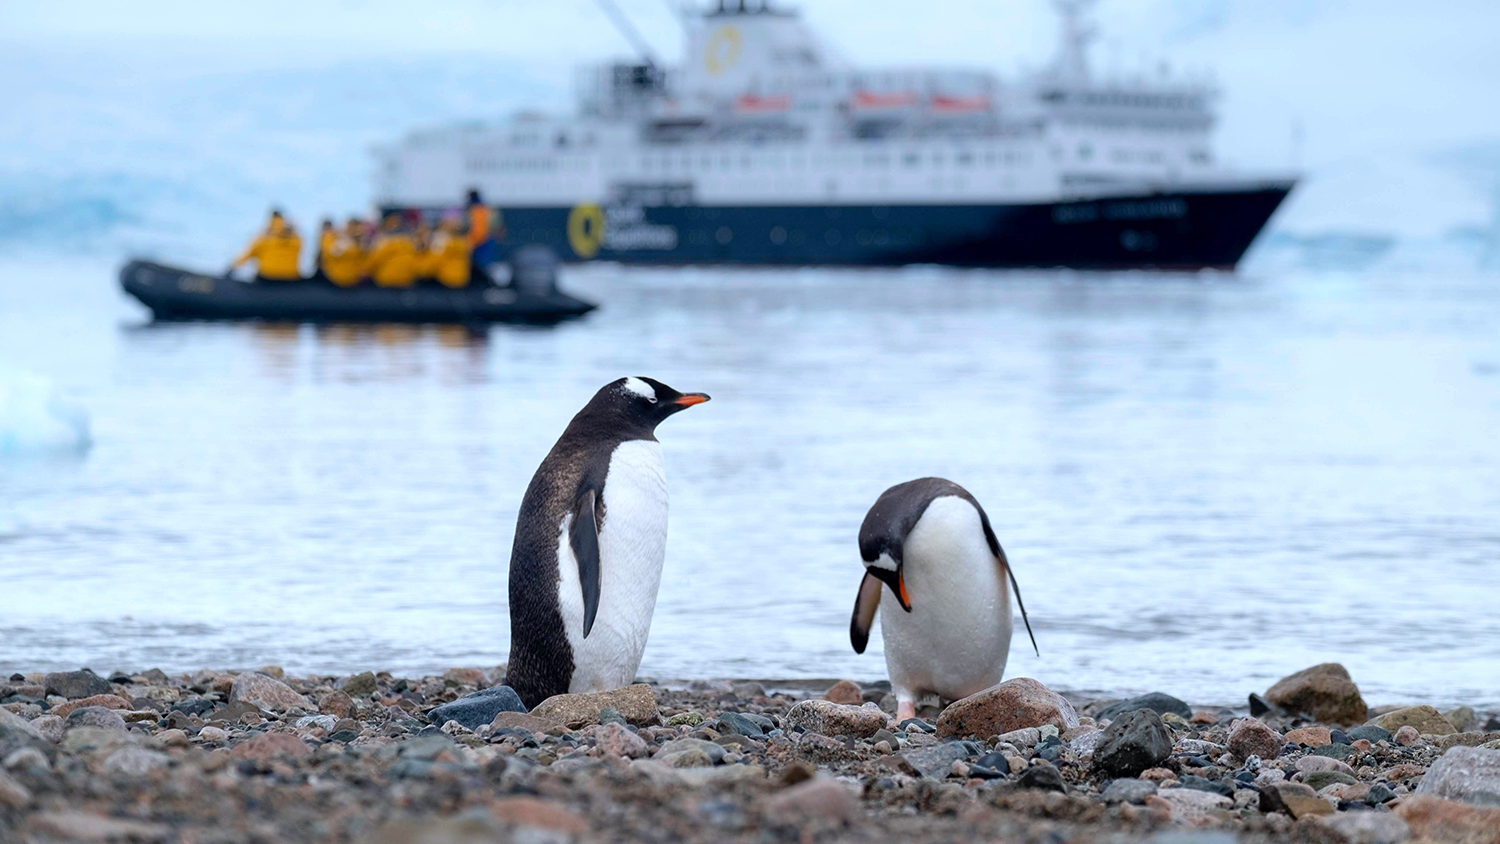 Gentoo penguins standing on a stony beach with a ship in the background.